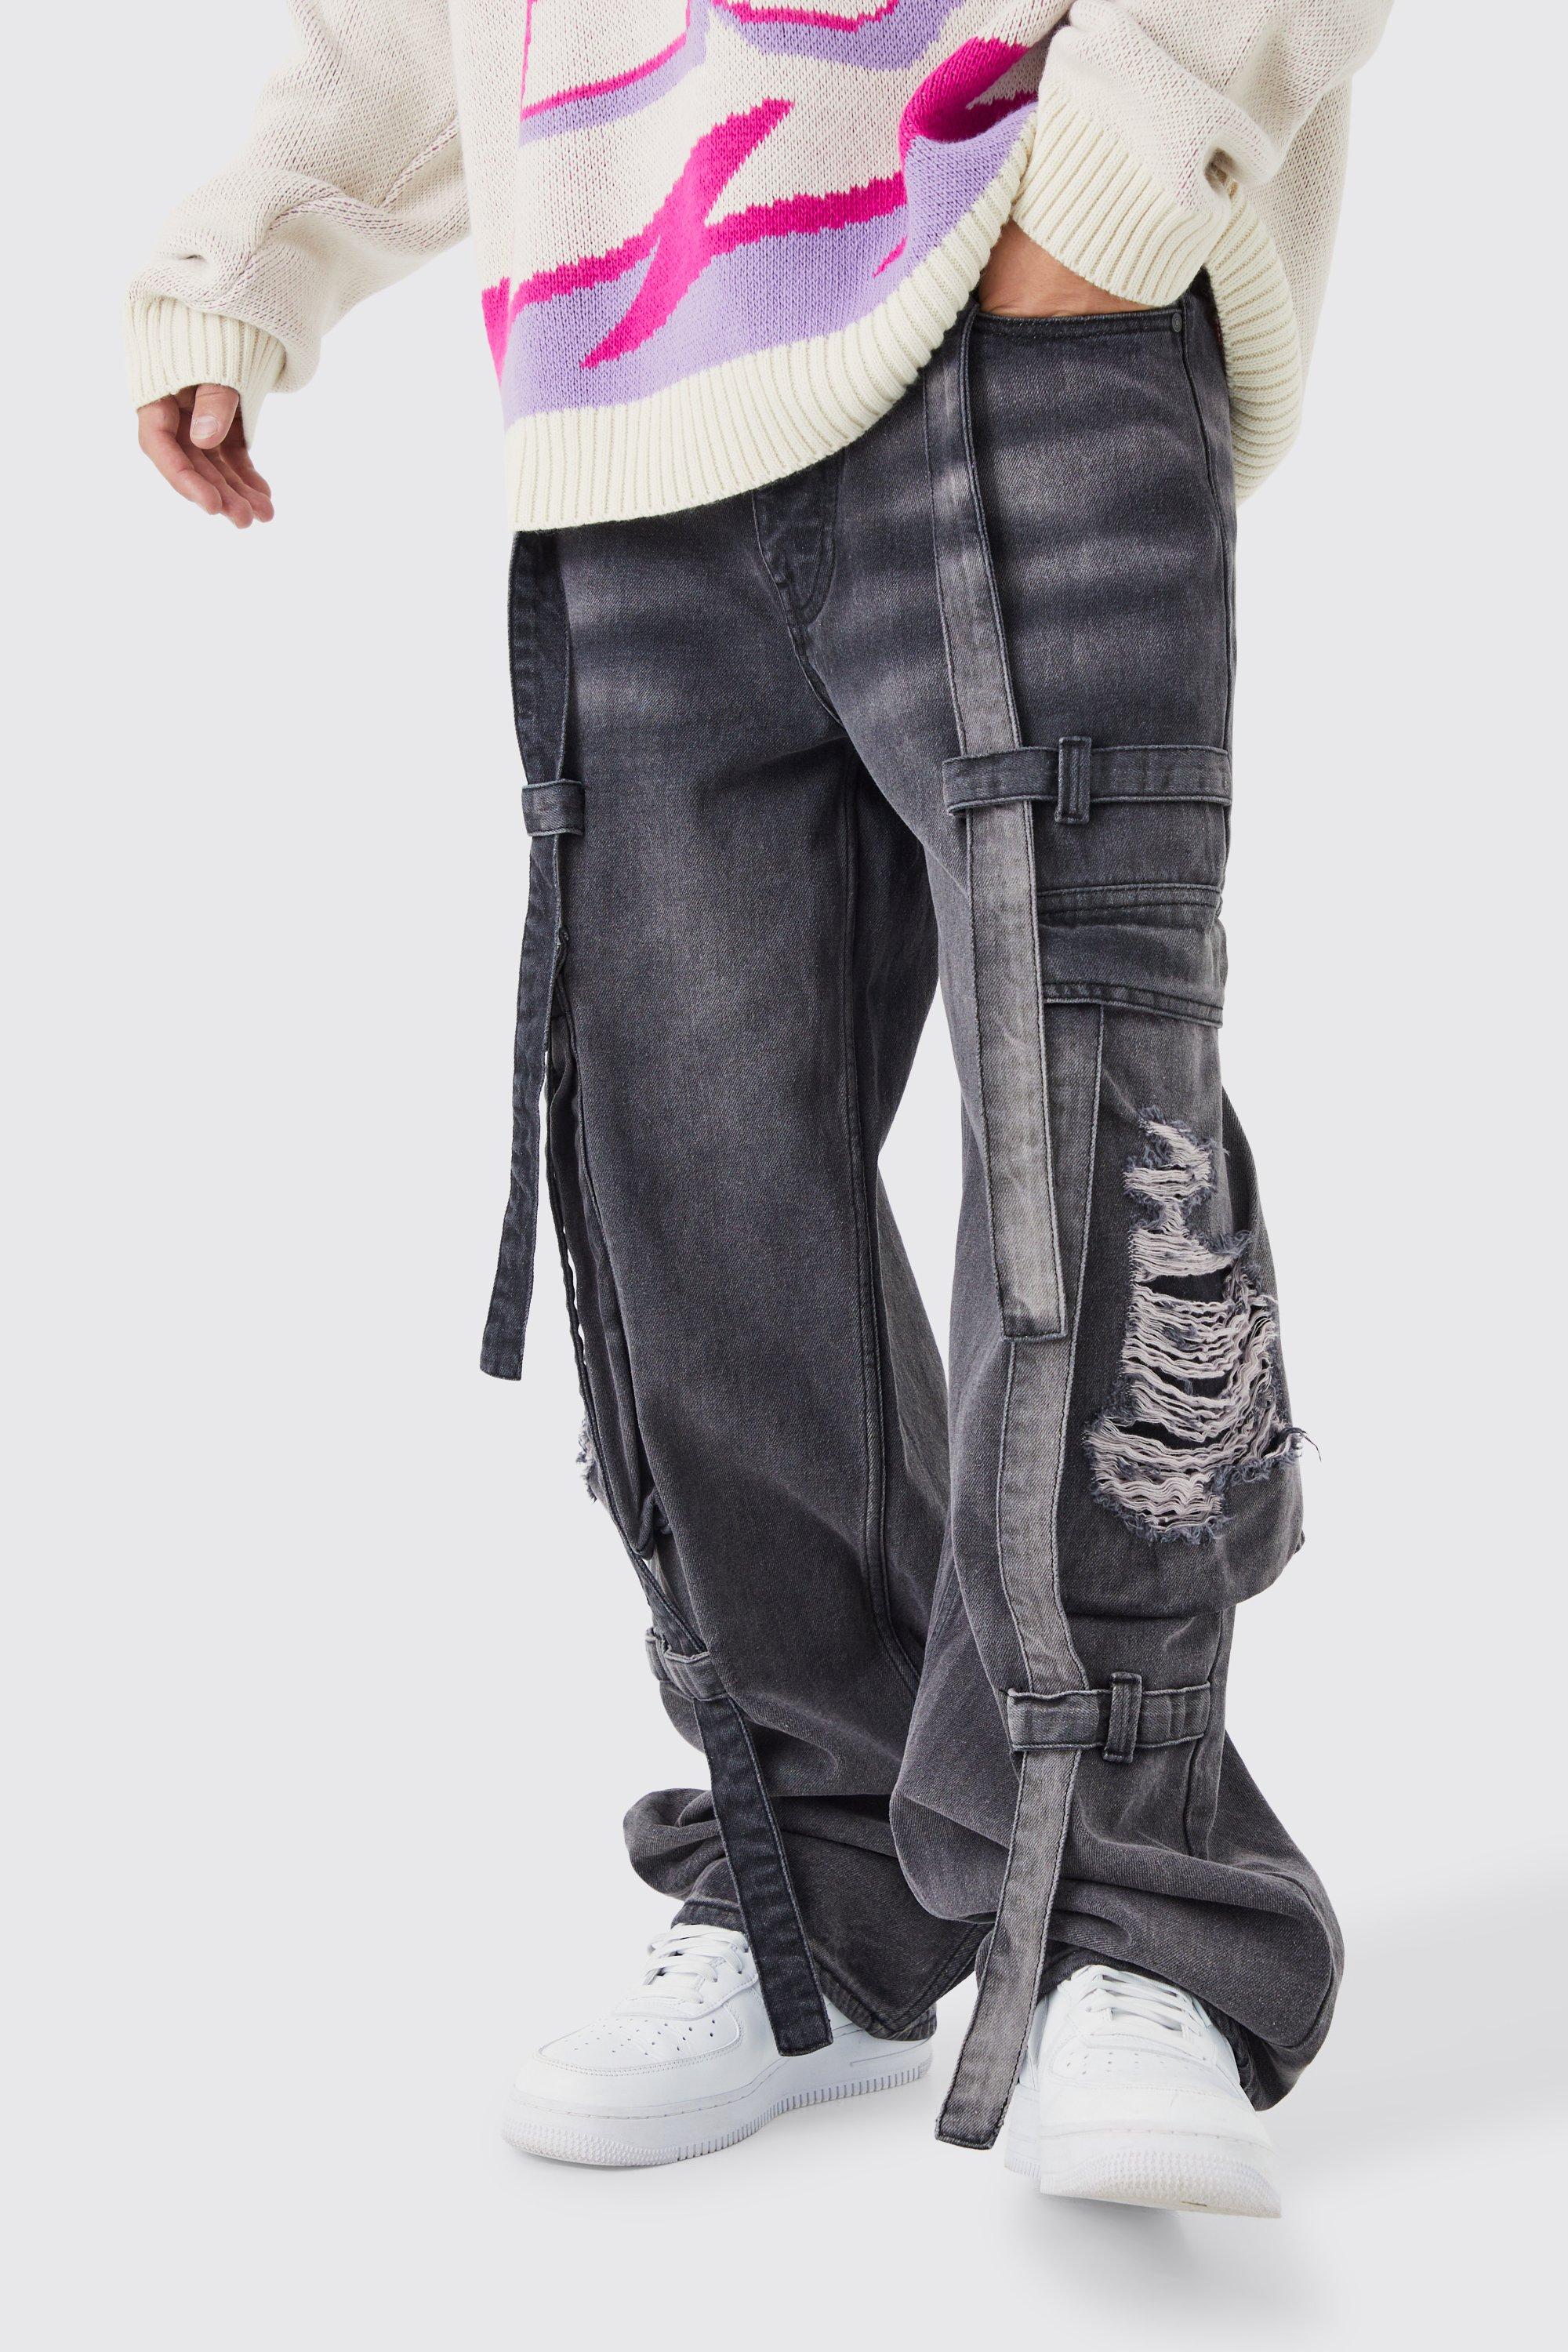 How to Wear Cargo Pants - the gray details